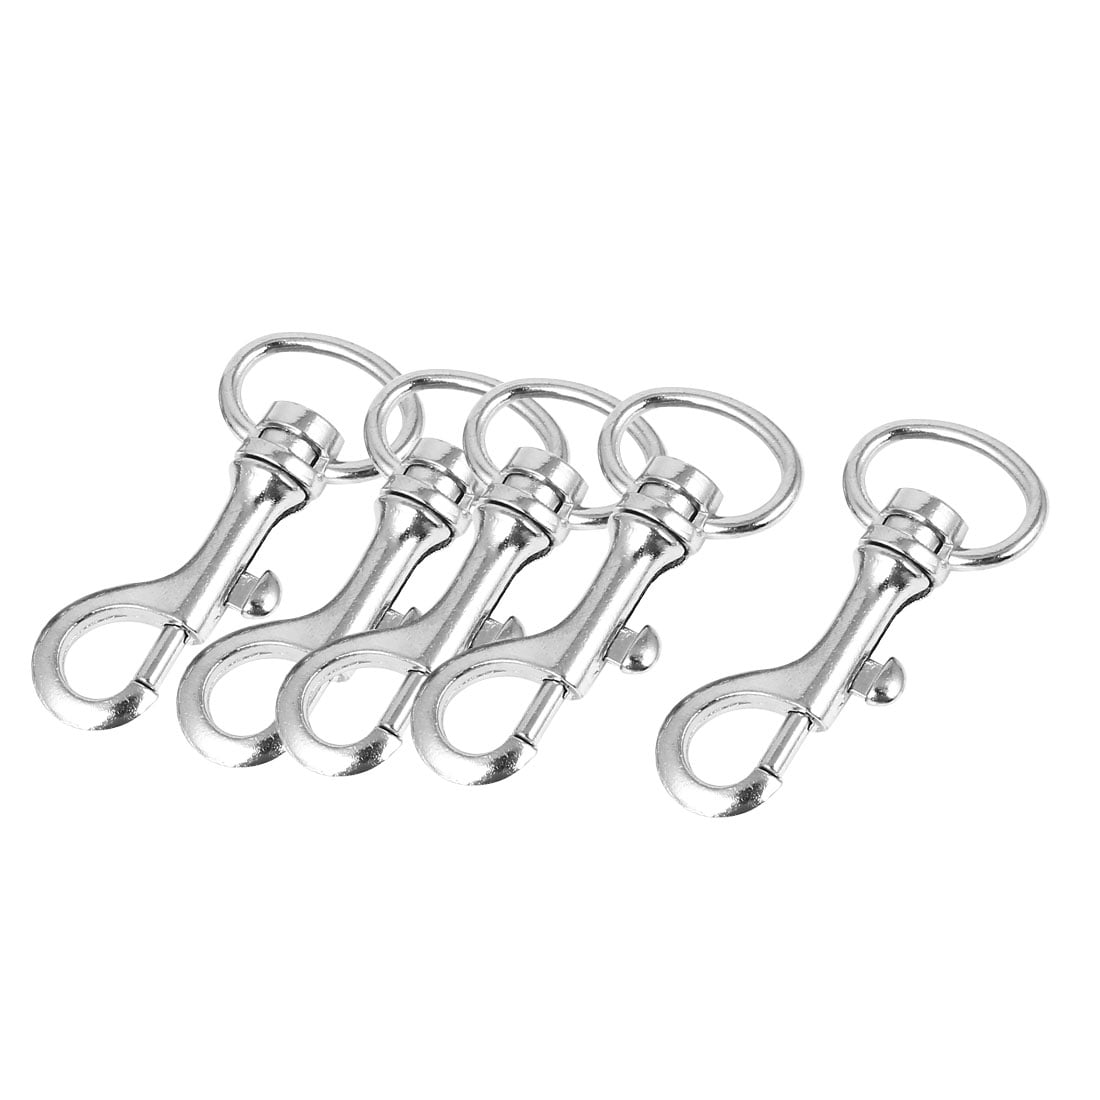 CHENGYIDA 10-PACK Antique Brone Swivel Eye Lobster Trigger Snap Clasp Hook QUALITY 